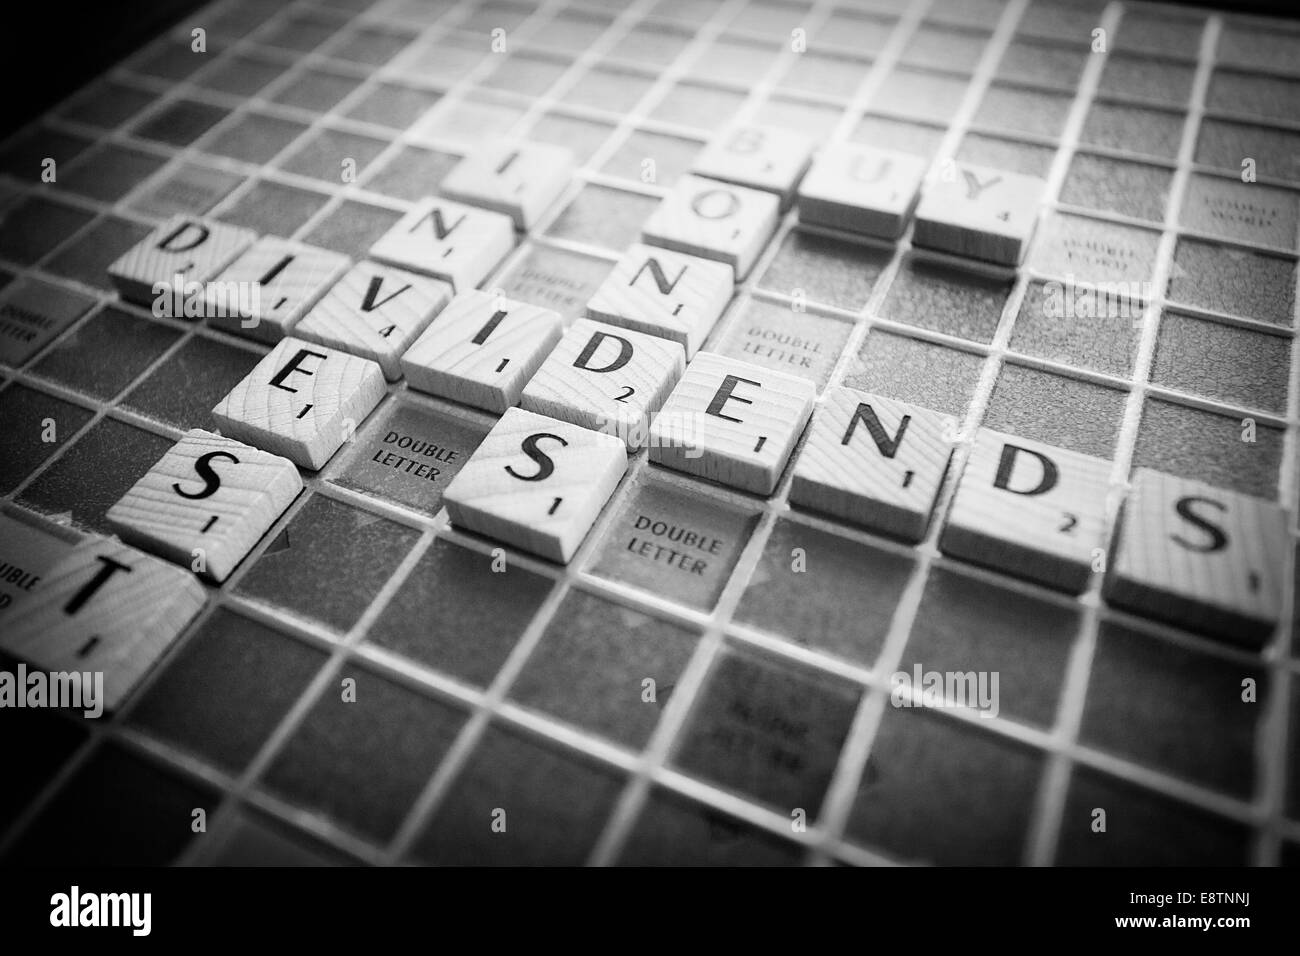 Financial terms spelled out on a Scrabble board Stock Photo